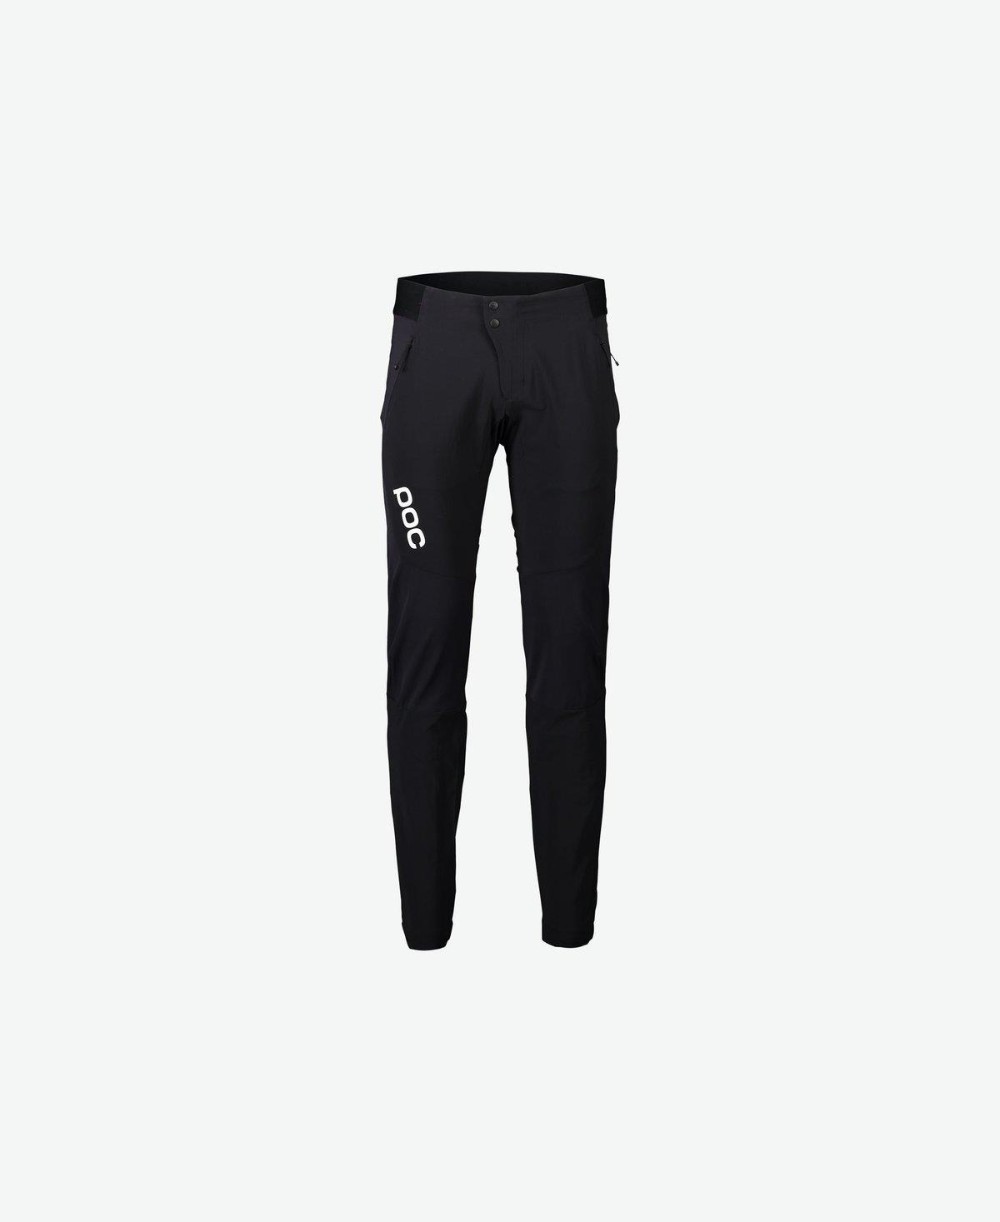 Rhythm Resistance Cycling Trousers image 0